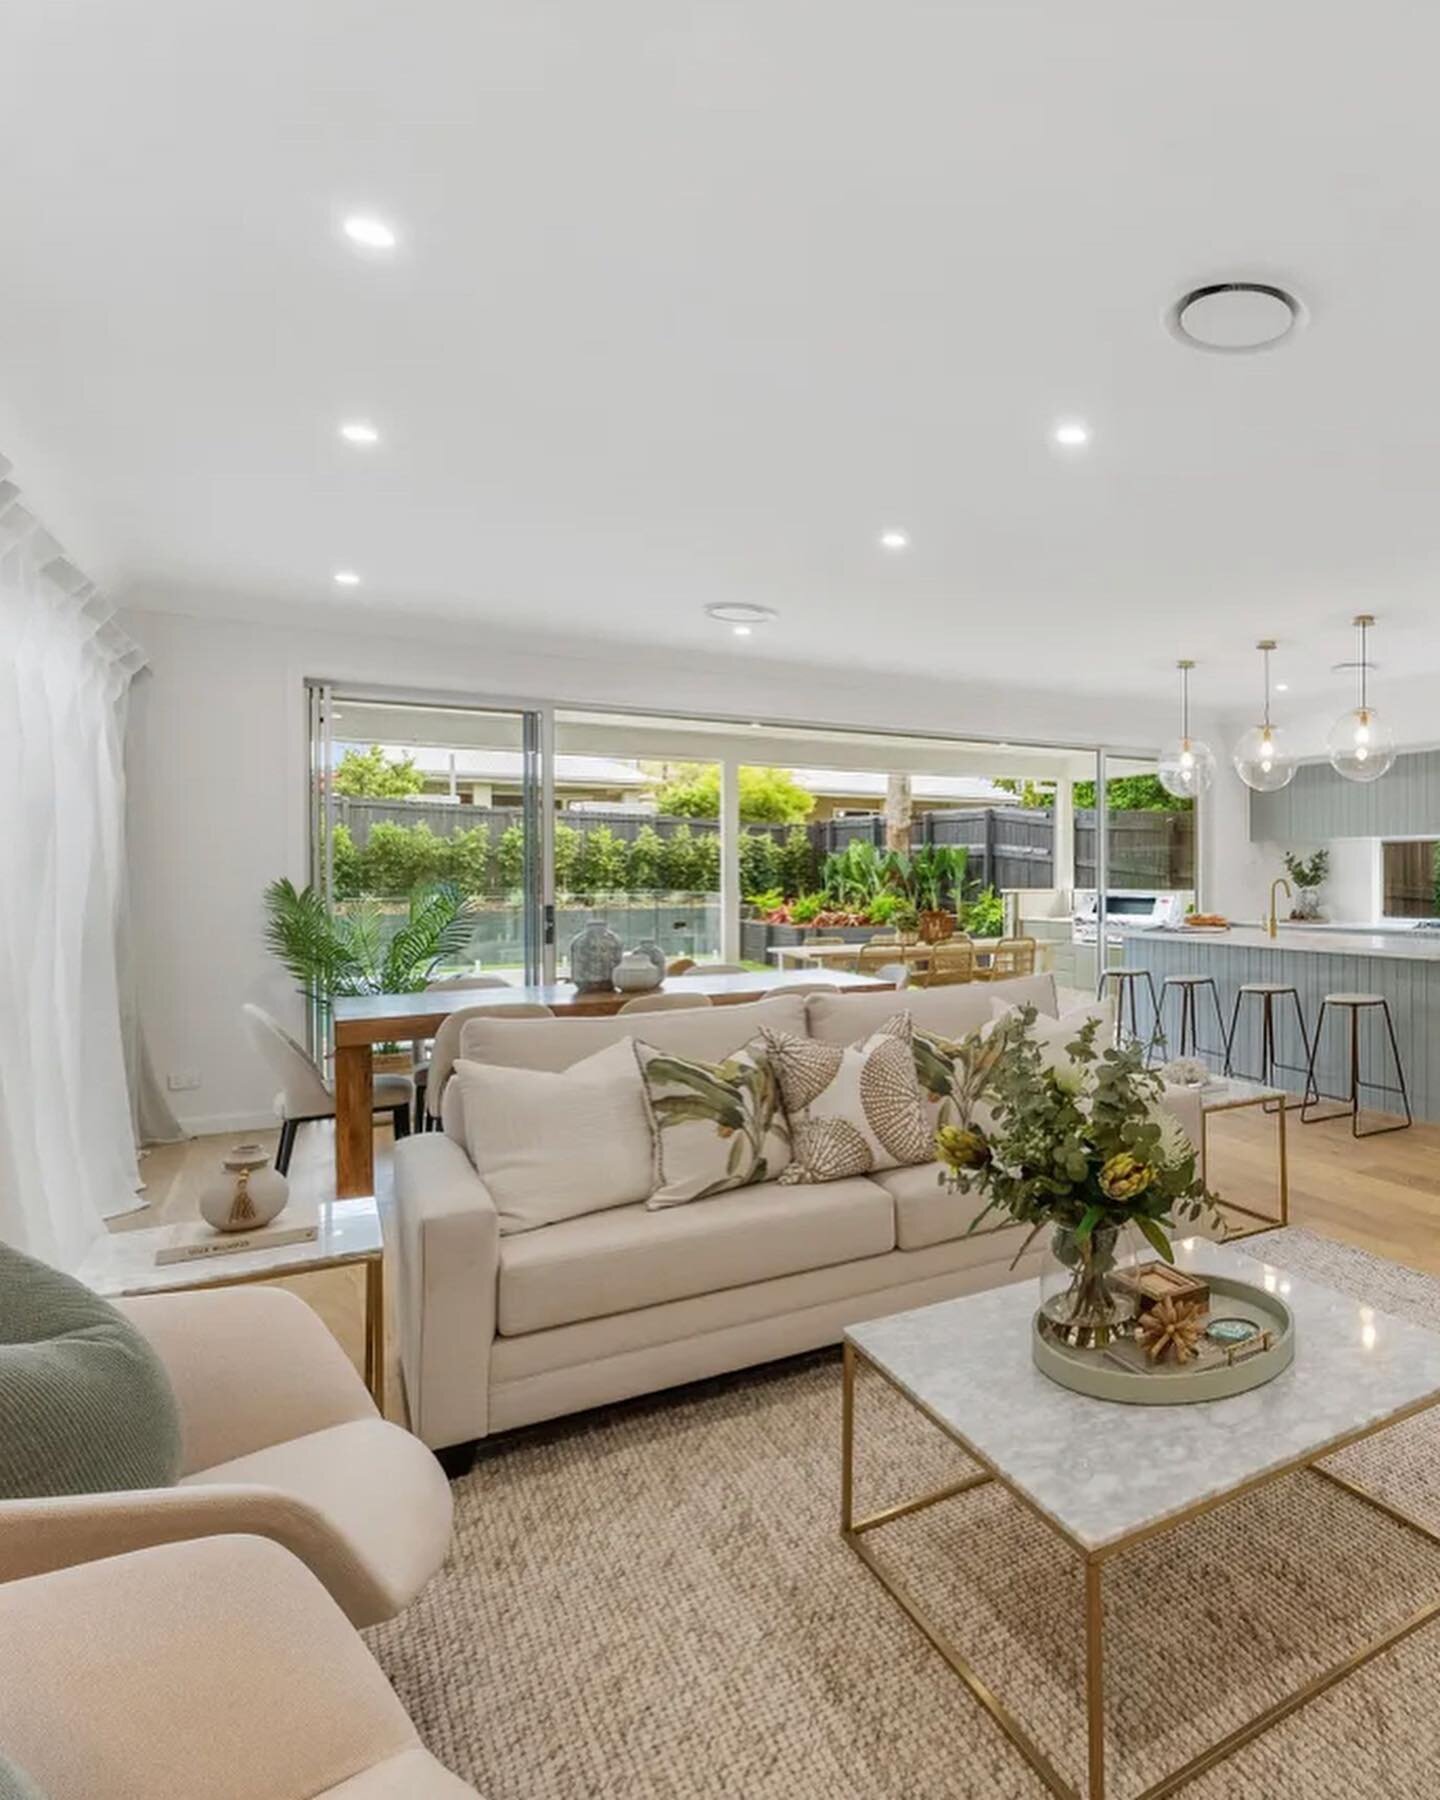 2023 off to a great start! ✨

35 Thirteenth Avenue Kedron SOLD for $2,200,000. 
A new suburb record for a house sold on a 405m2 block. 75 groups inspected the home, sold in 8 days!! 

Styling @uptown_property_styling 
Selling agents @matthewjabs.plac